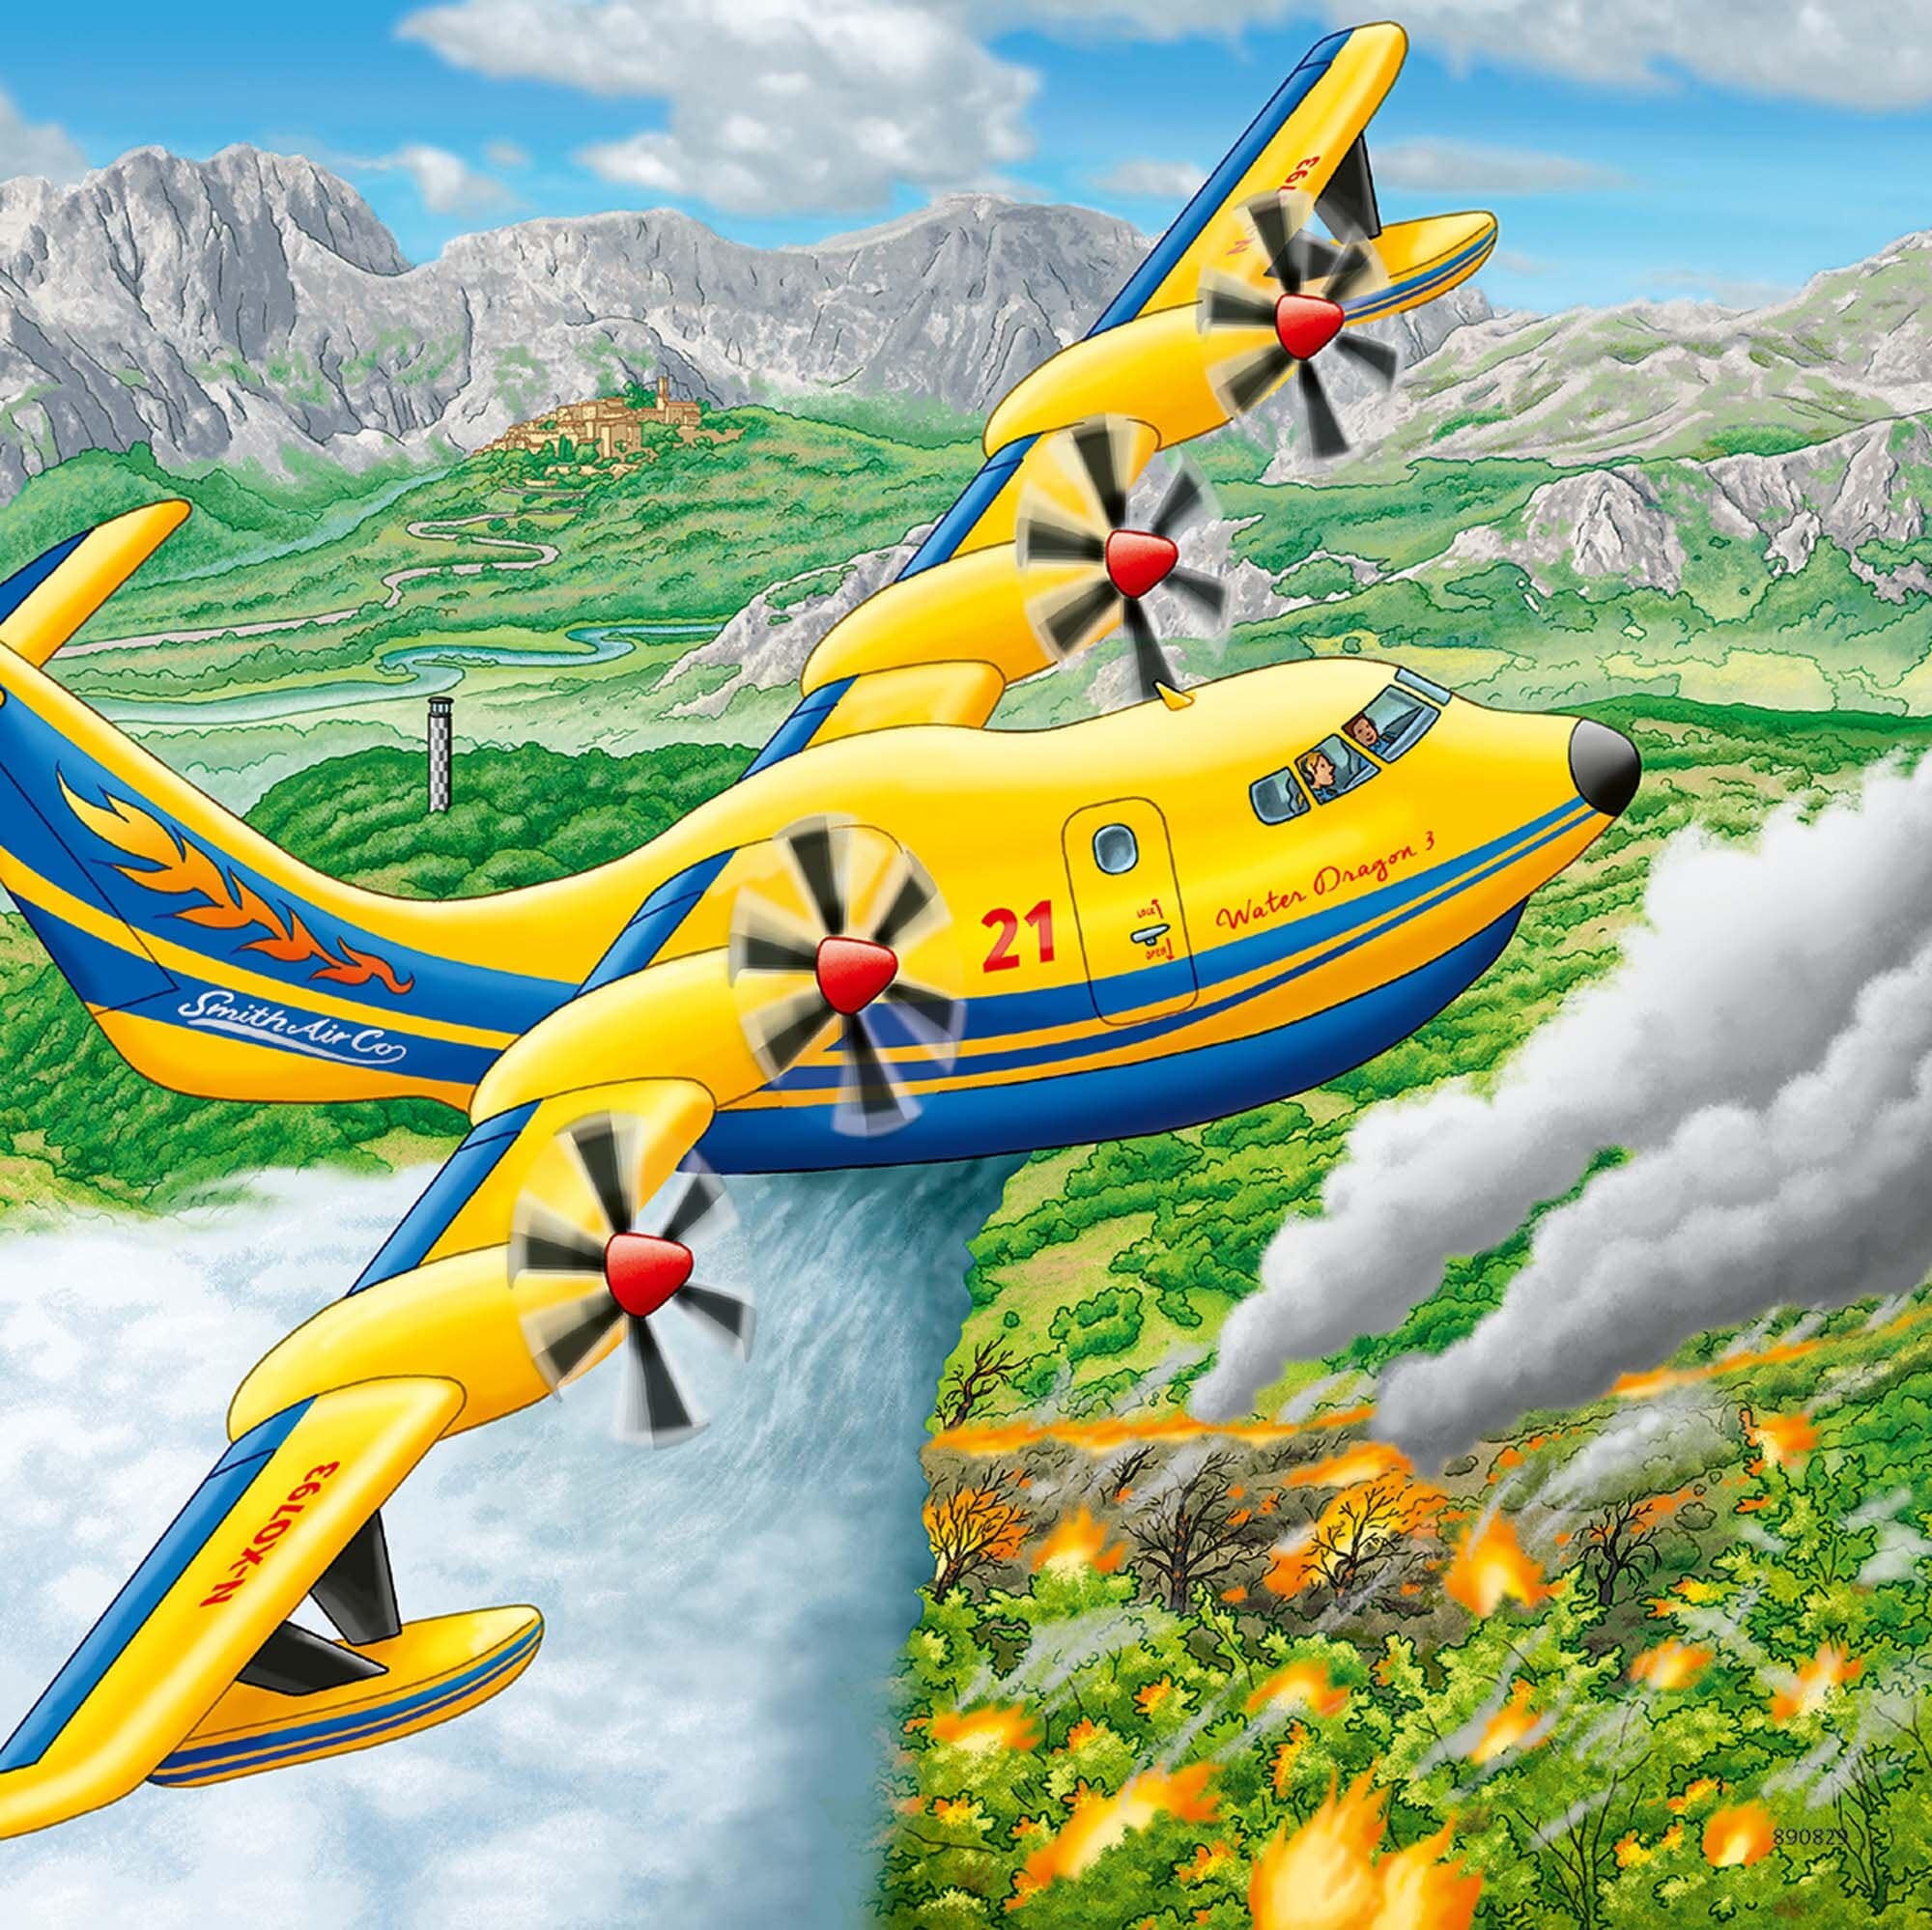 Ravensburger Puslespill, Above the Clouds 3x49 brikker